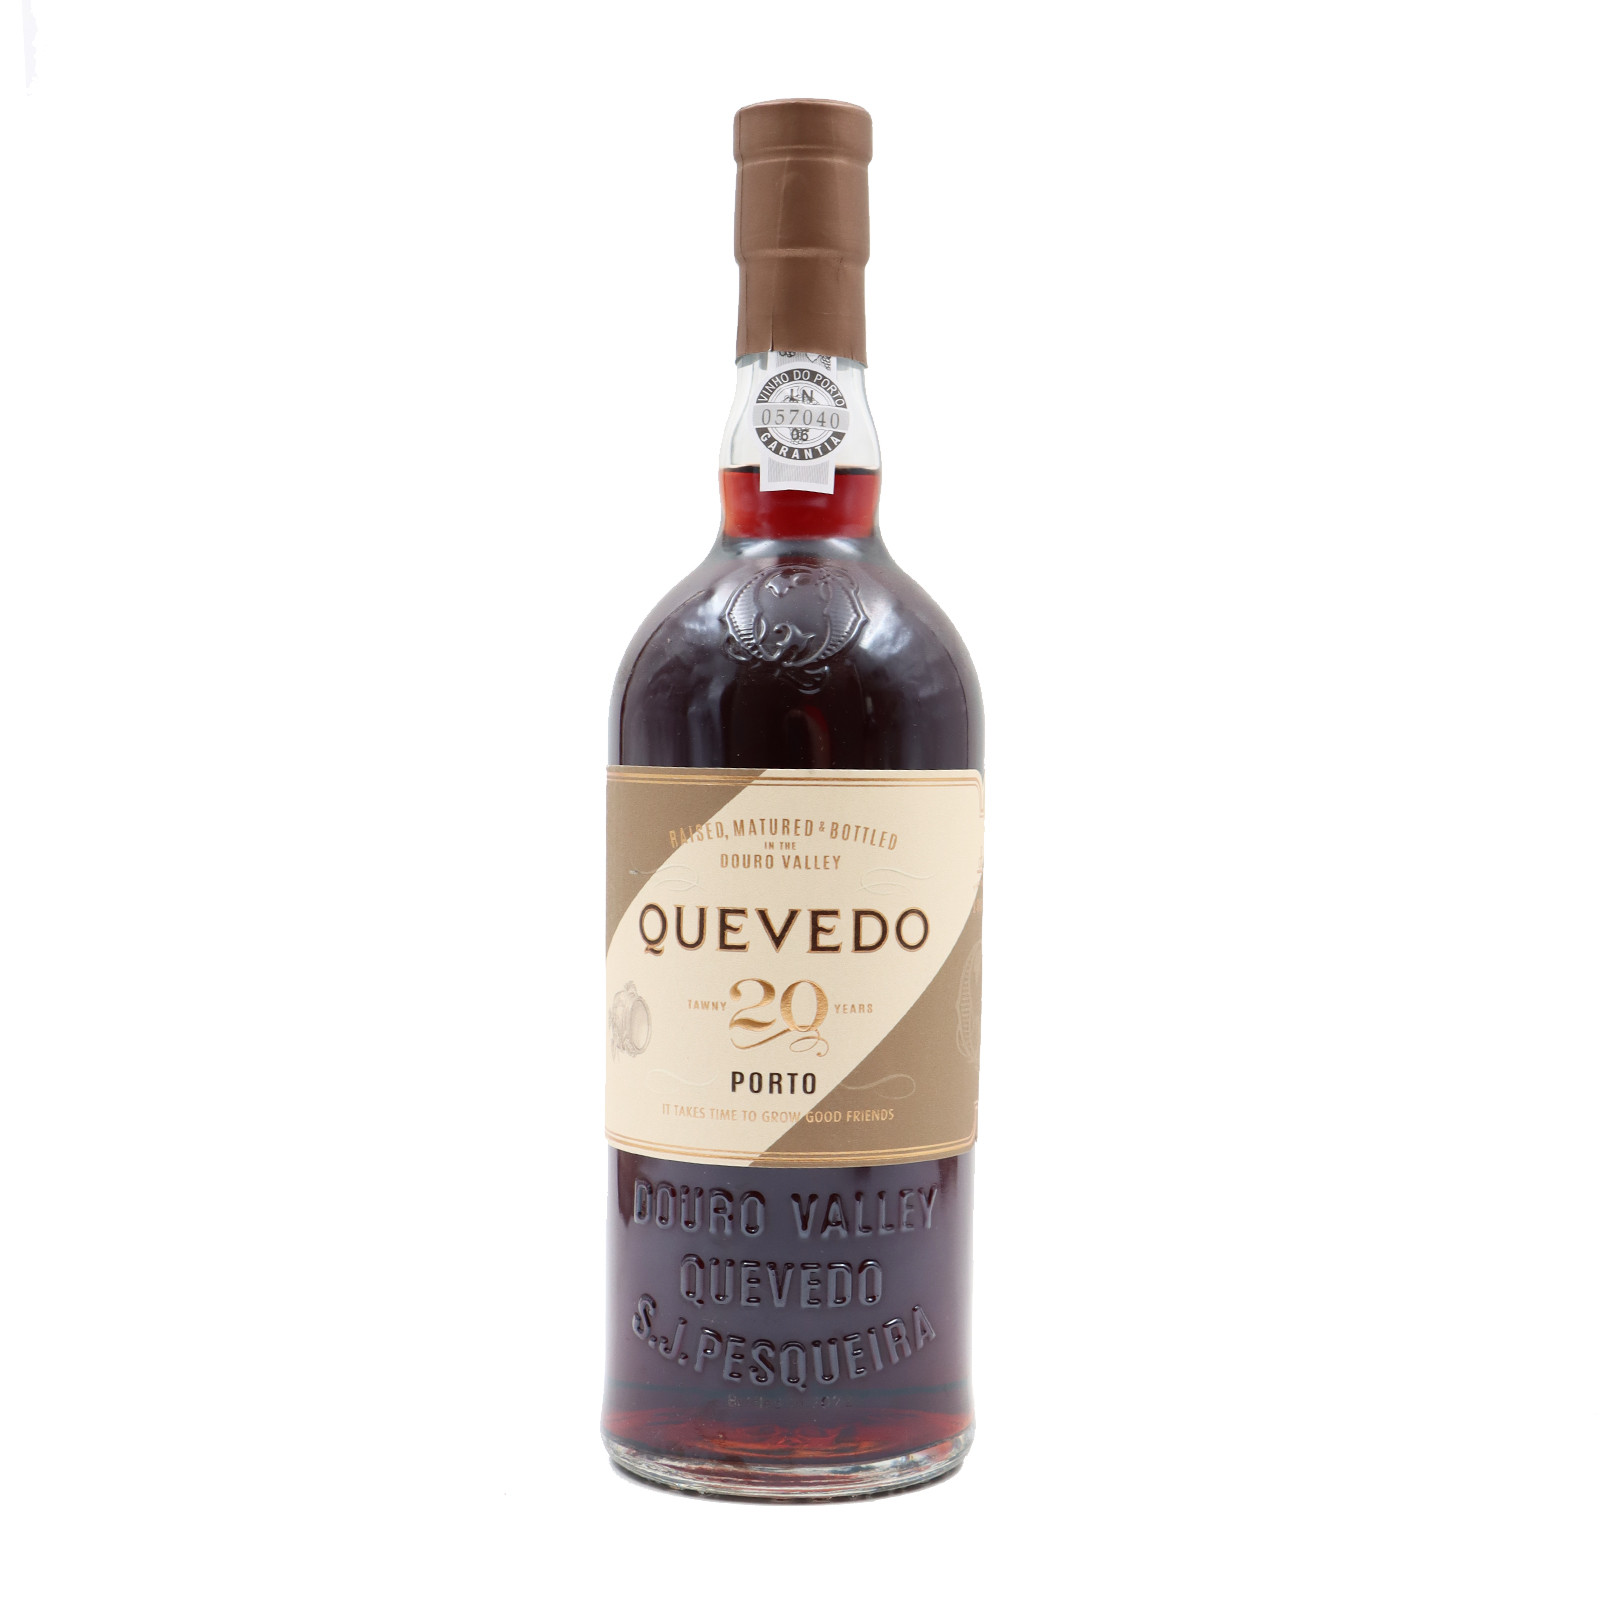 Quevedo 20 years old Tawny Port